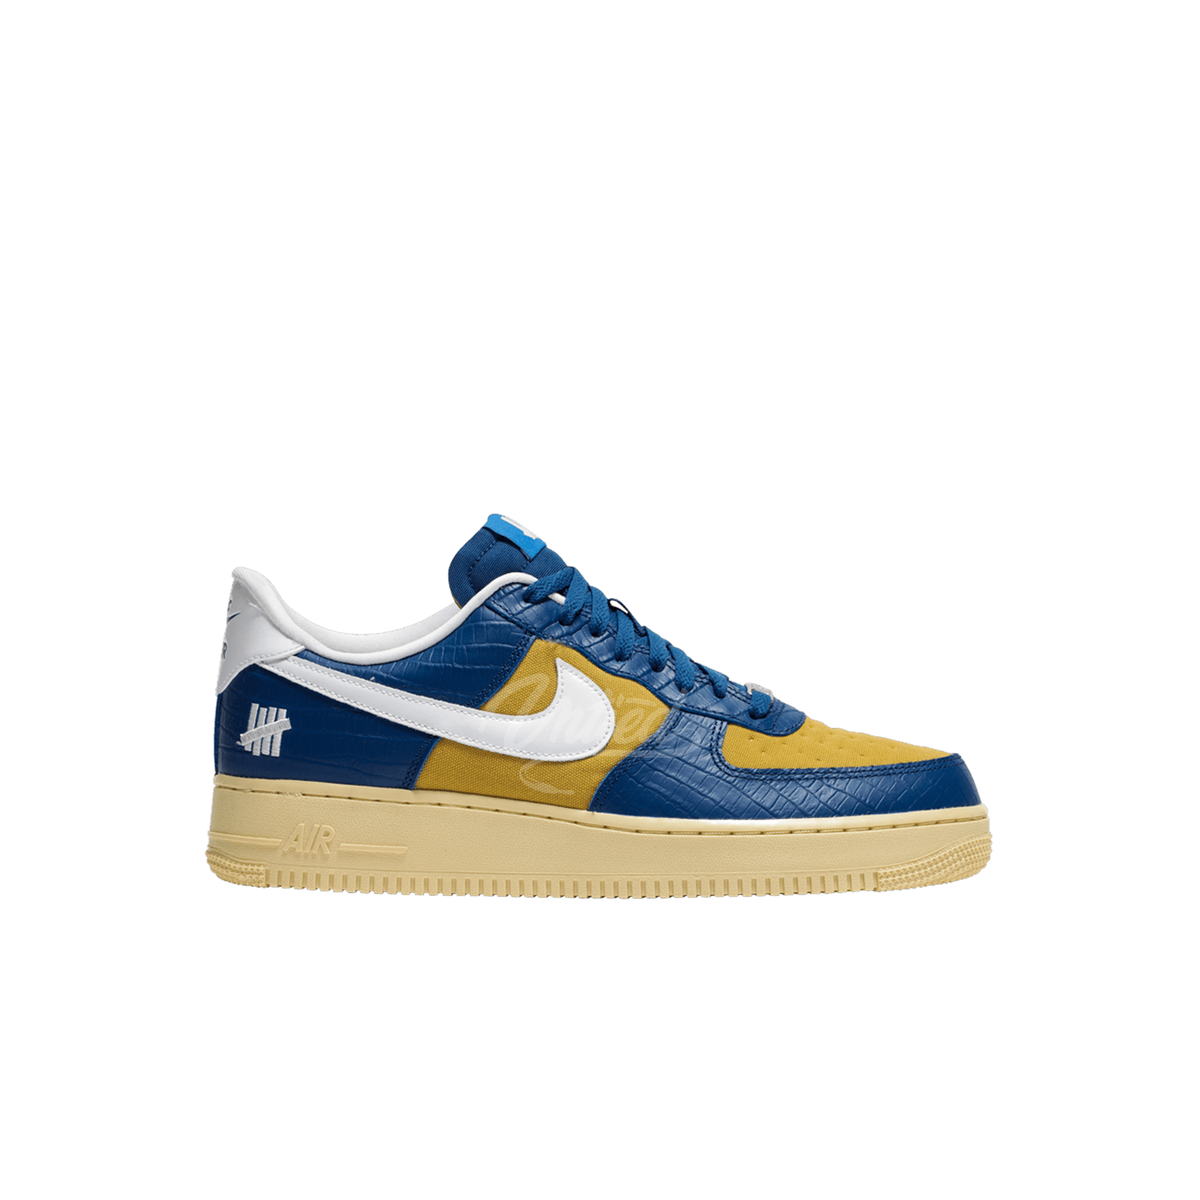 Air Force 1 Undefeated "5 On It Blue/Yellow Croc"